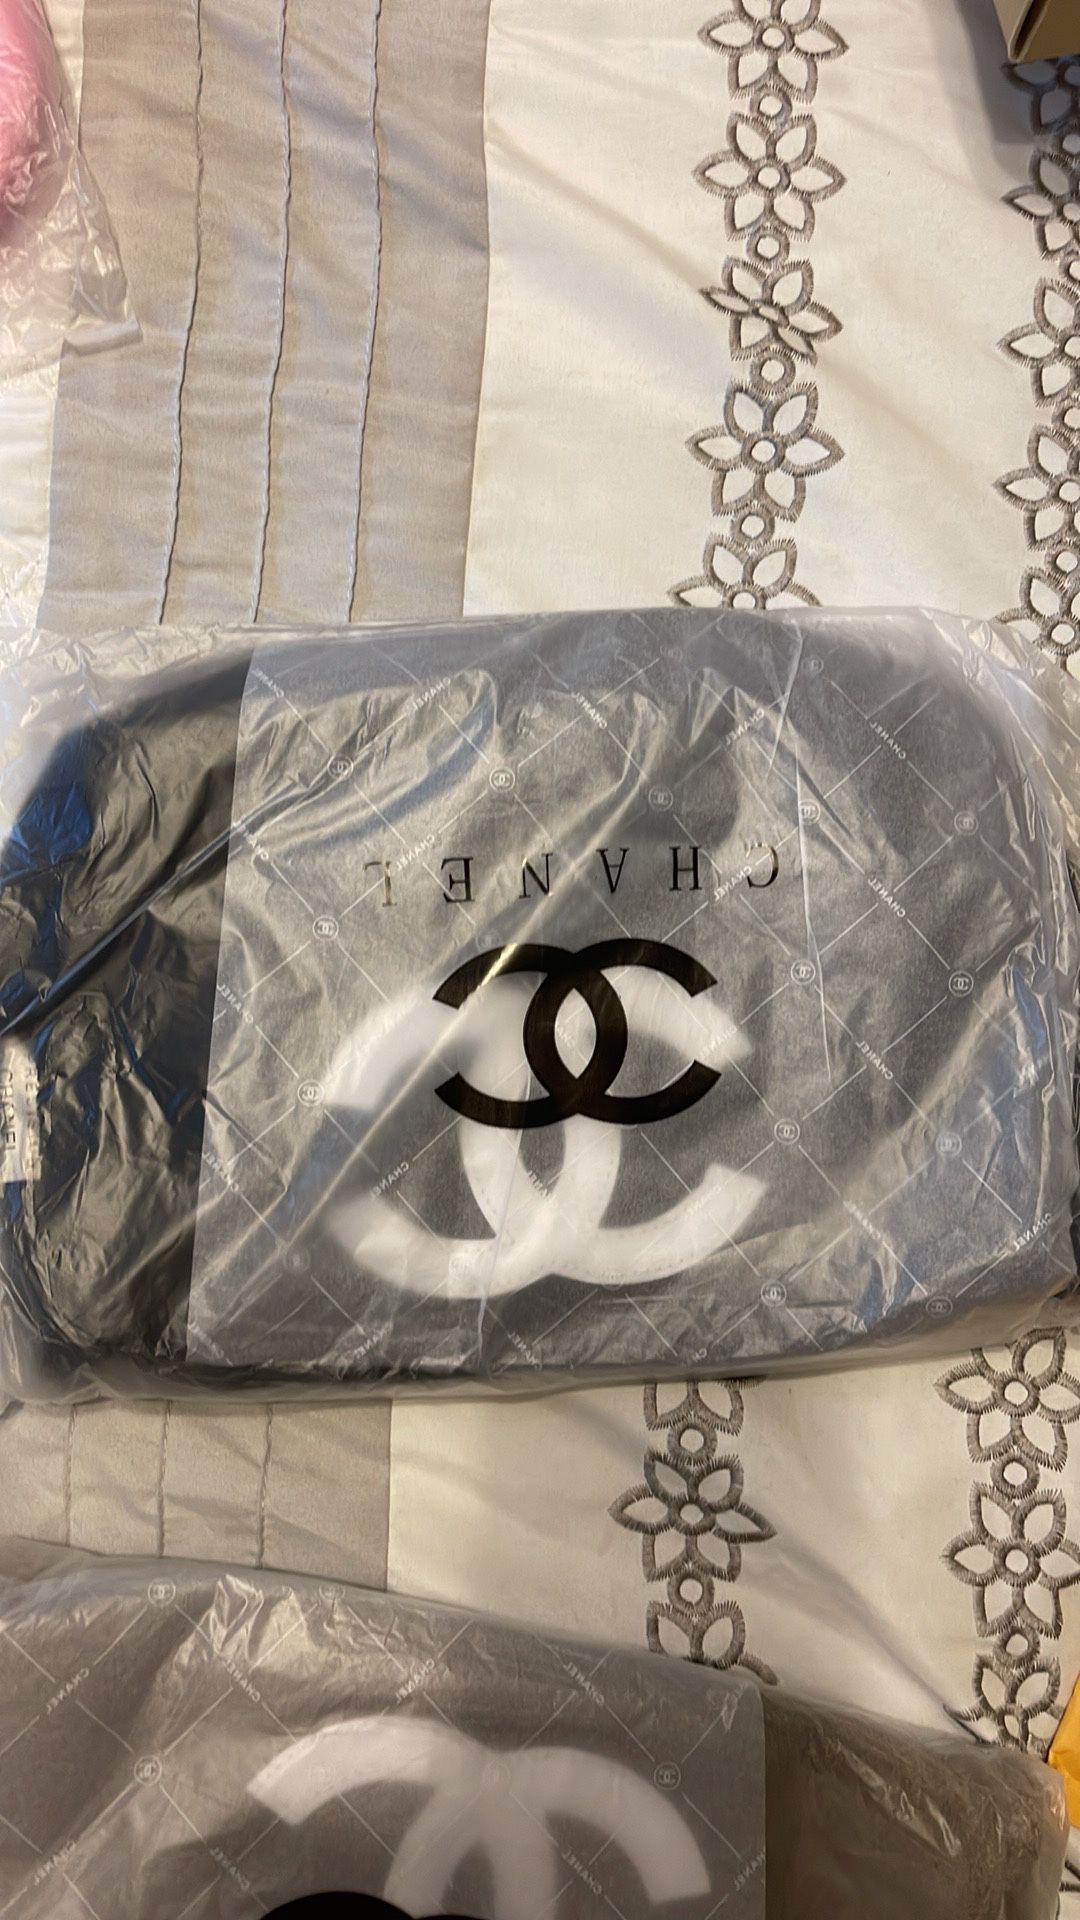 Precision VIP Authentic Chanel Bag And Bambam Bag Brand New for Sale in  Arcola, TX - OfferUp